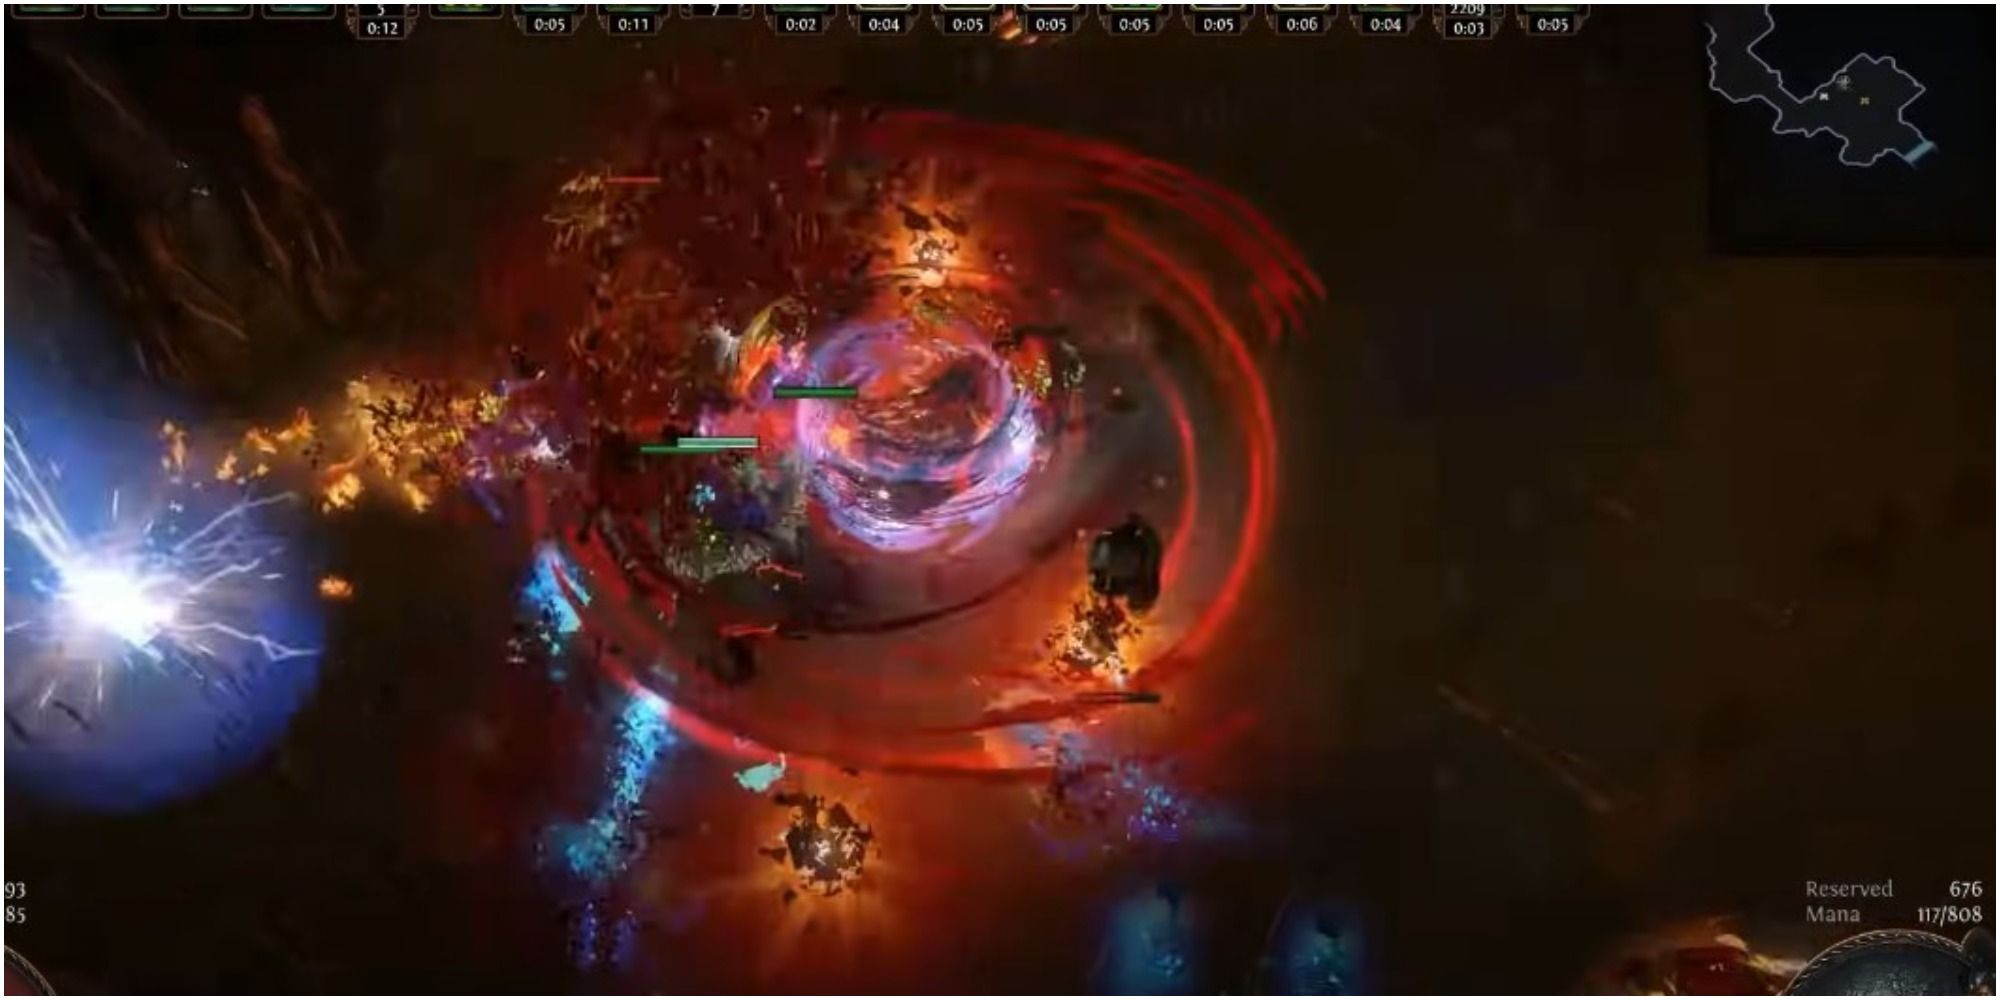 Path Of Exile Scion Using A Blood Cyclone Ability To Take Out A Wave Of Enemies